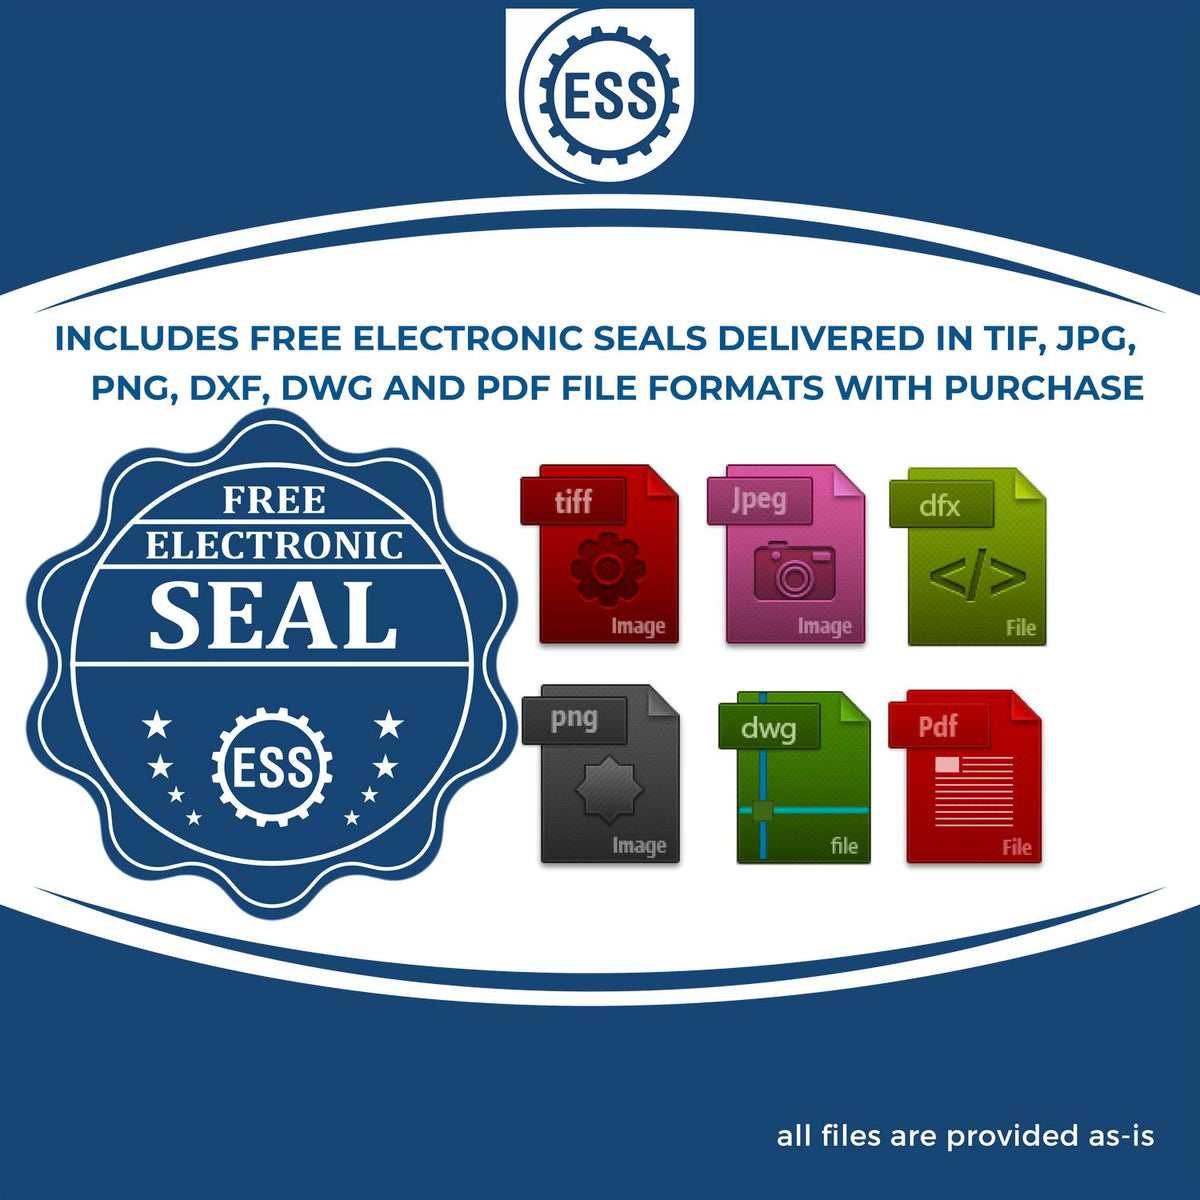 An infographic for the free electronic seal for the Soft Guam Professional Engineer Seal illustrating the different file type icons such as DXF, DWG, TIF, JPG and PNG.